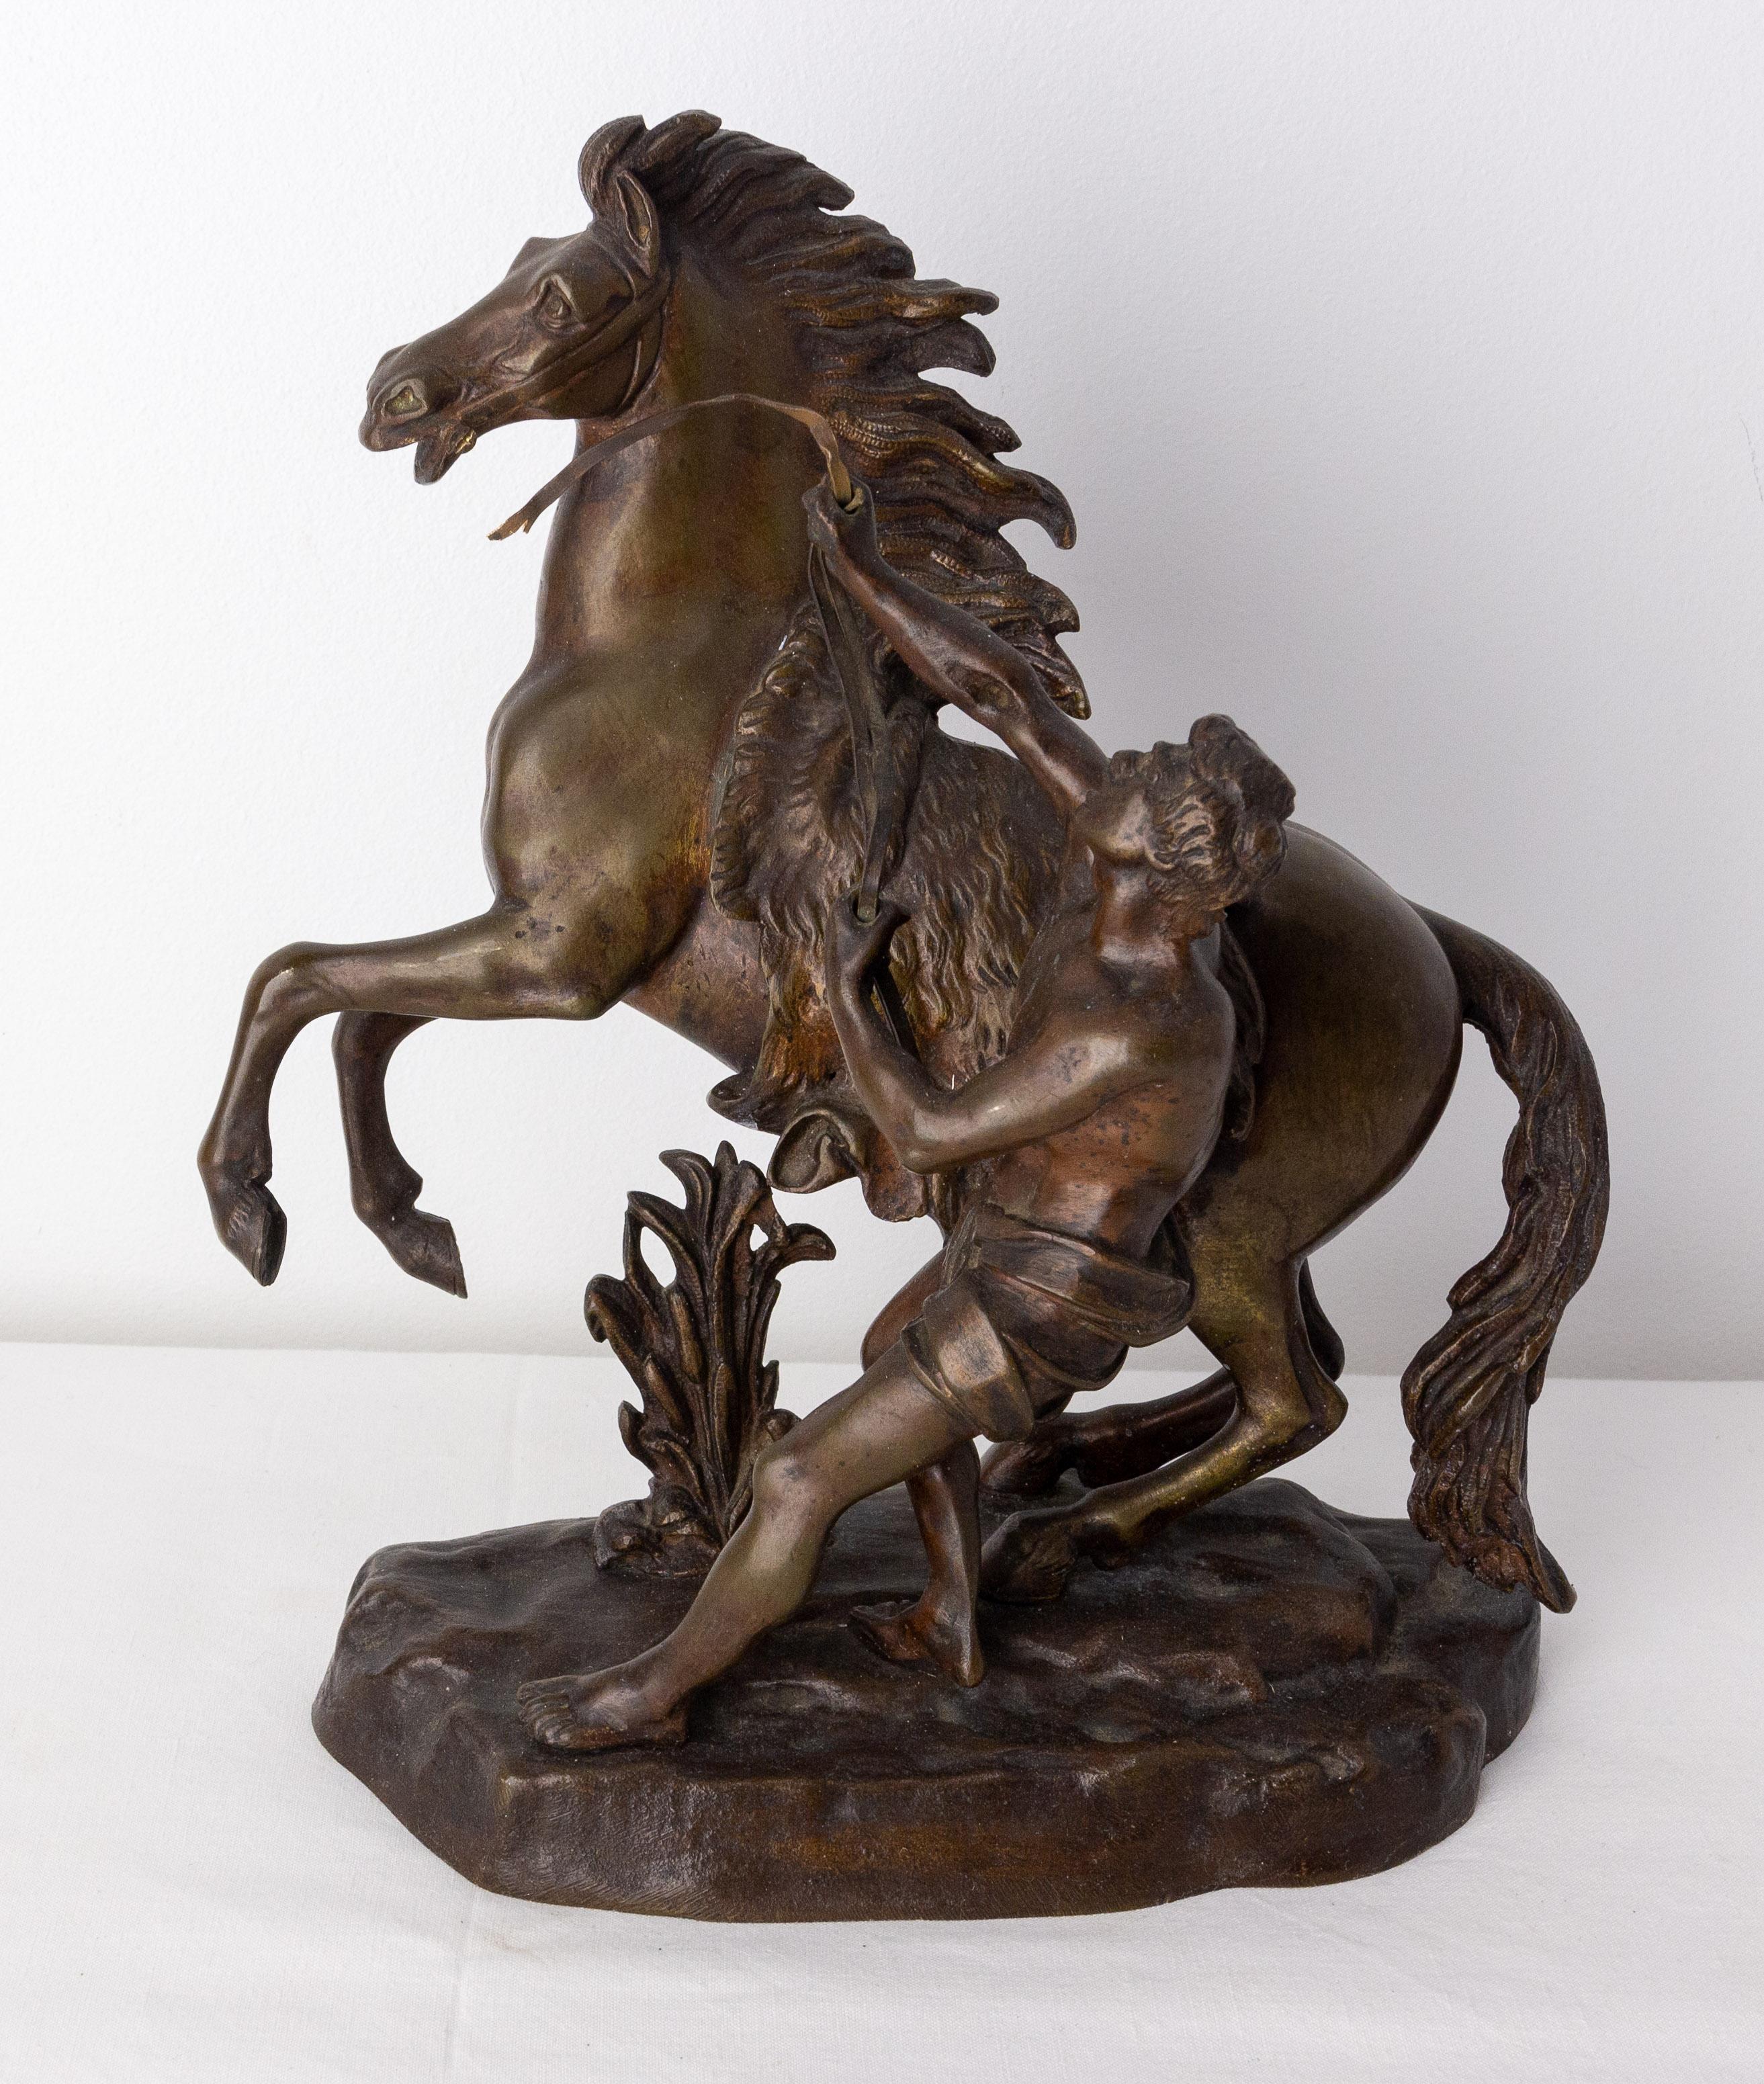 Bronze statue in the style of Guillaume Marly.
The horses of Marly were commissioned by Louis XV to sculptor Guillaume Coustou to decorate the entrance of the park of Marly castle. In 1794, the marble statues of Carrara were transferred to Place de